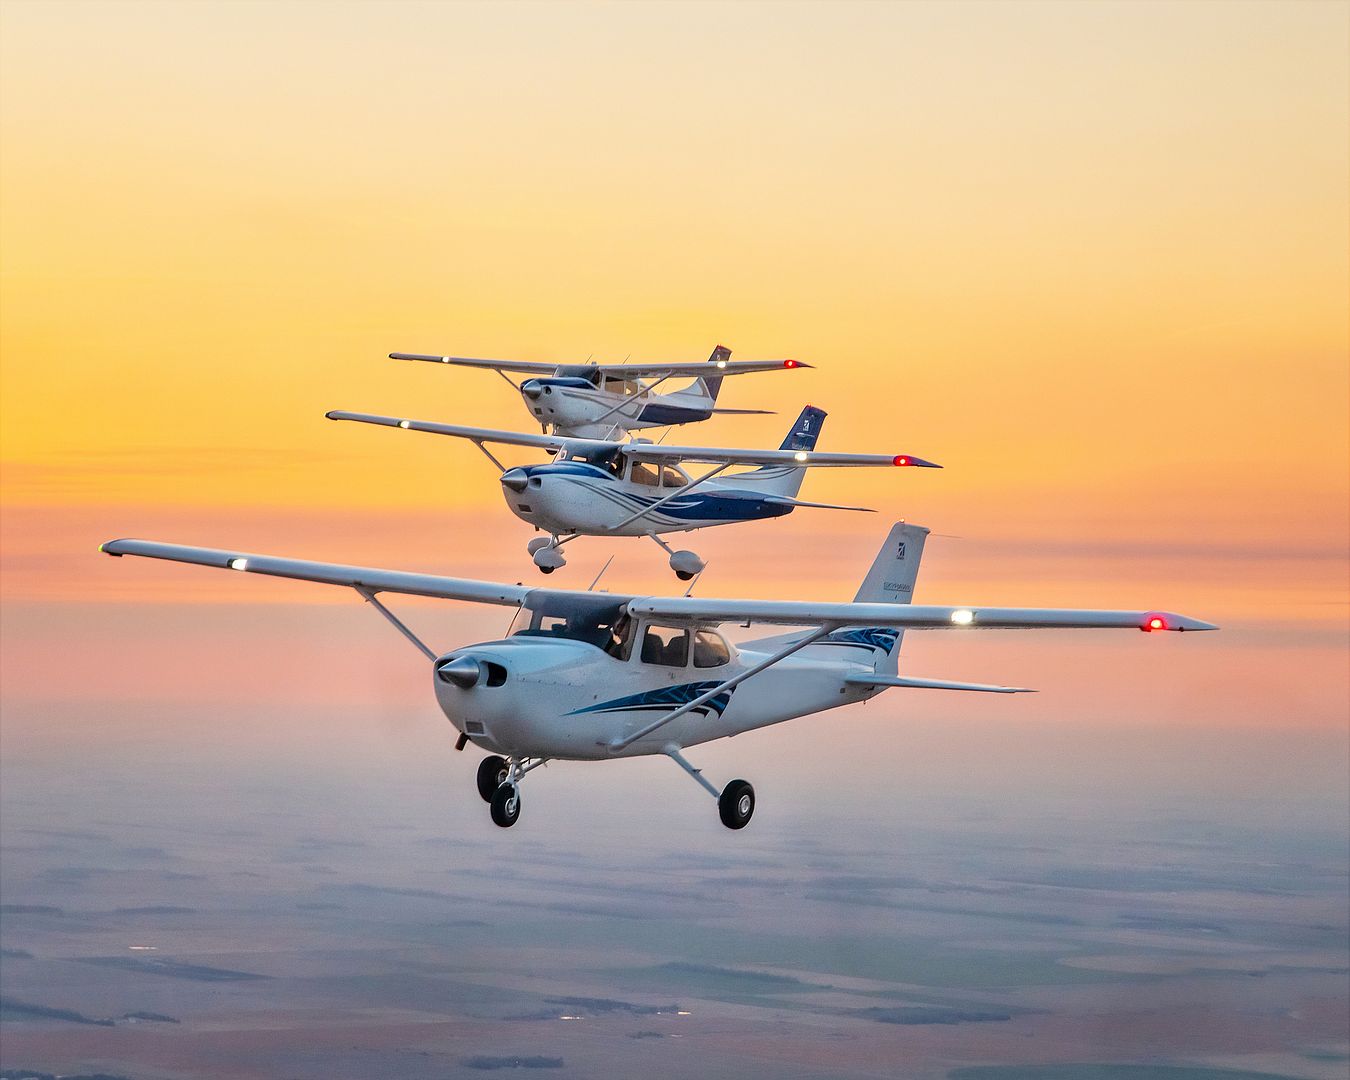 Textron Aviation Brings New Upgrades To Iconic Piston Product Lineup